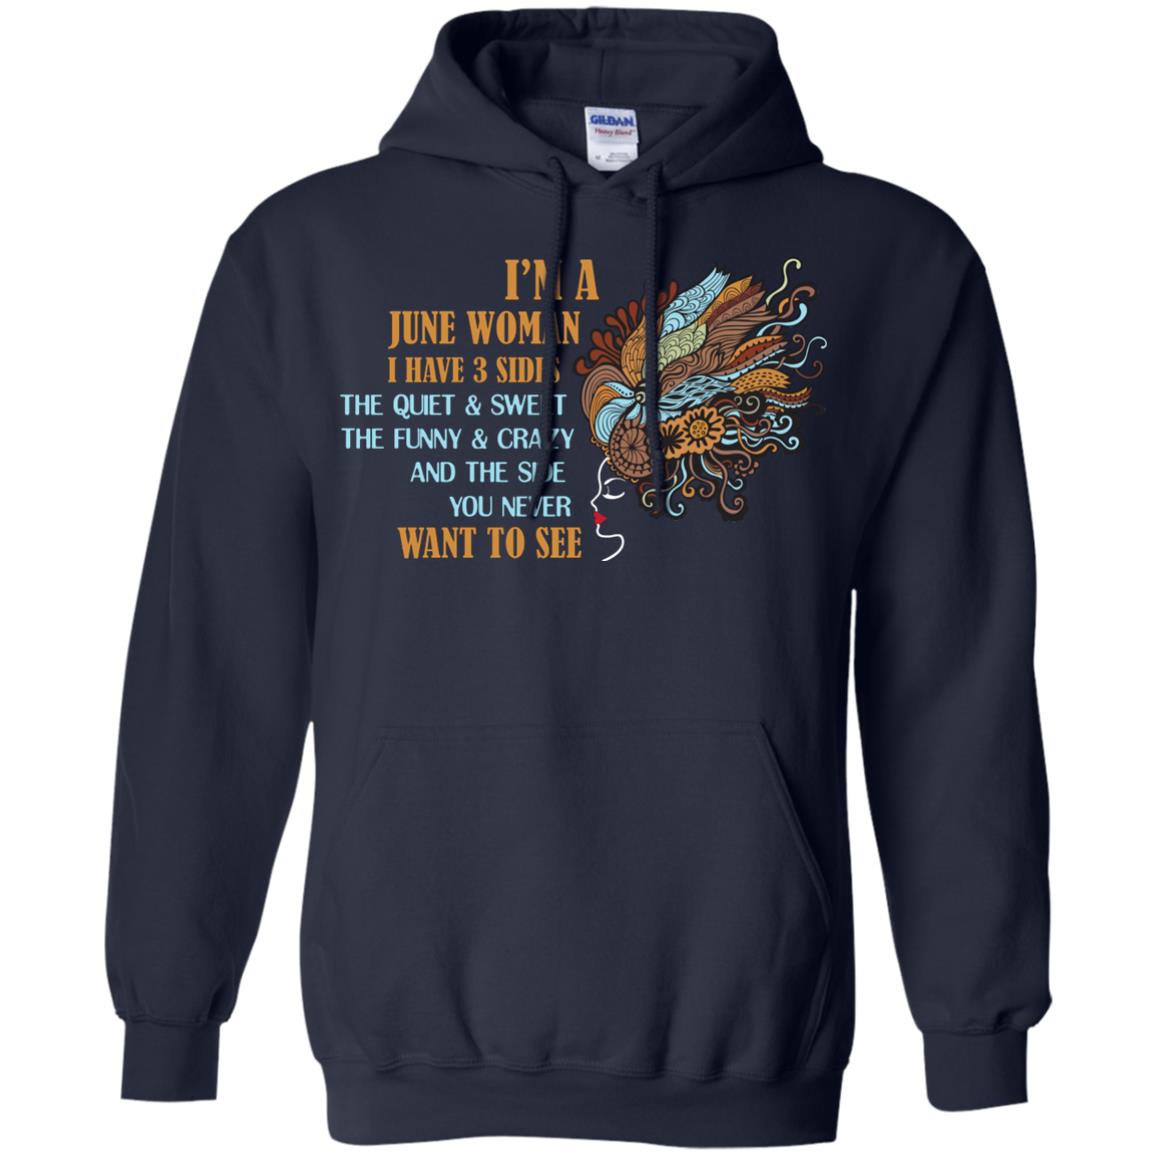 I'm A June Woman I Have 3 Sides The Quite And Sweet The Funny And Crazy And The Side You Never Want To SeeG185 Gildan Pullover Hoodie 8 oz.